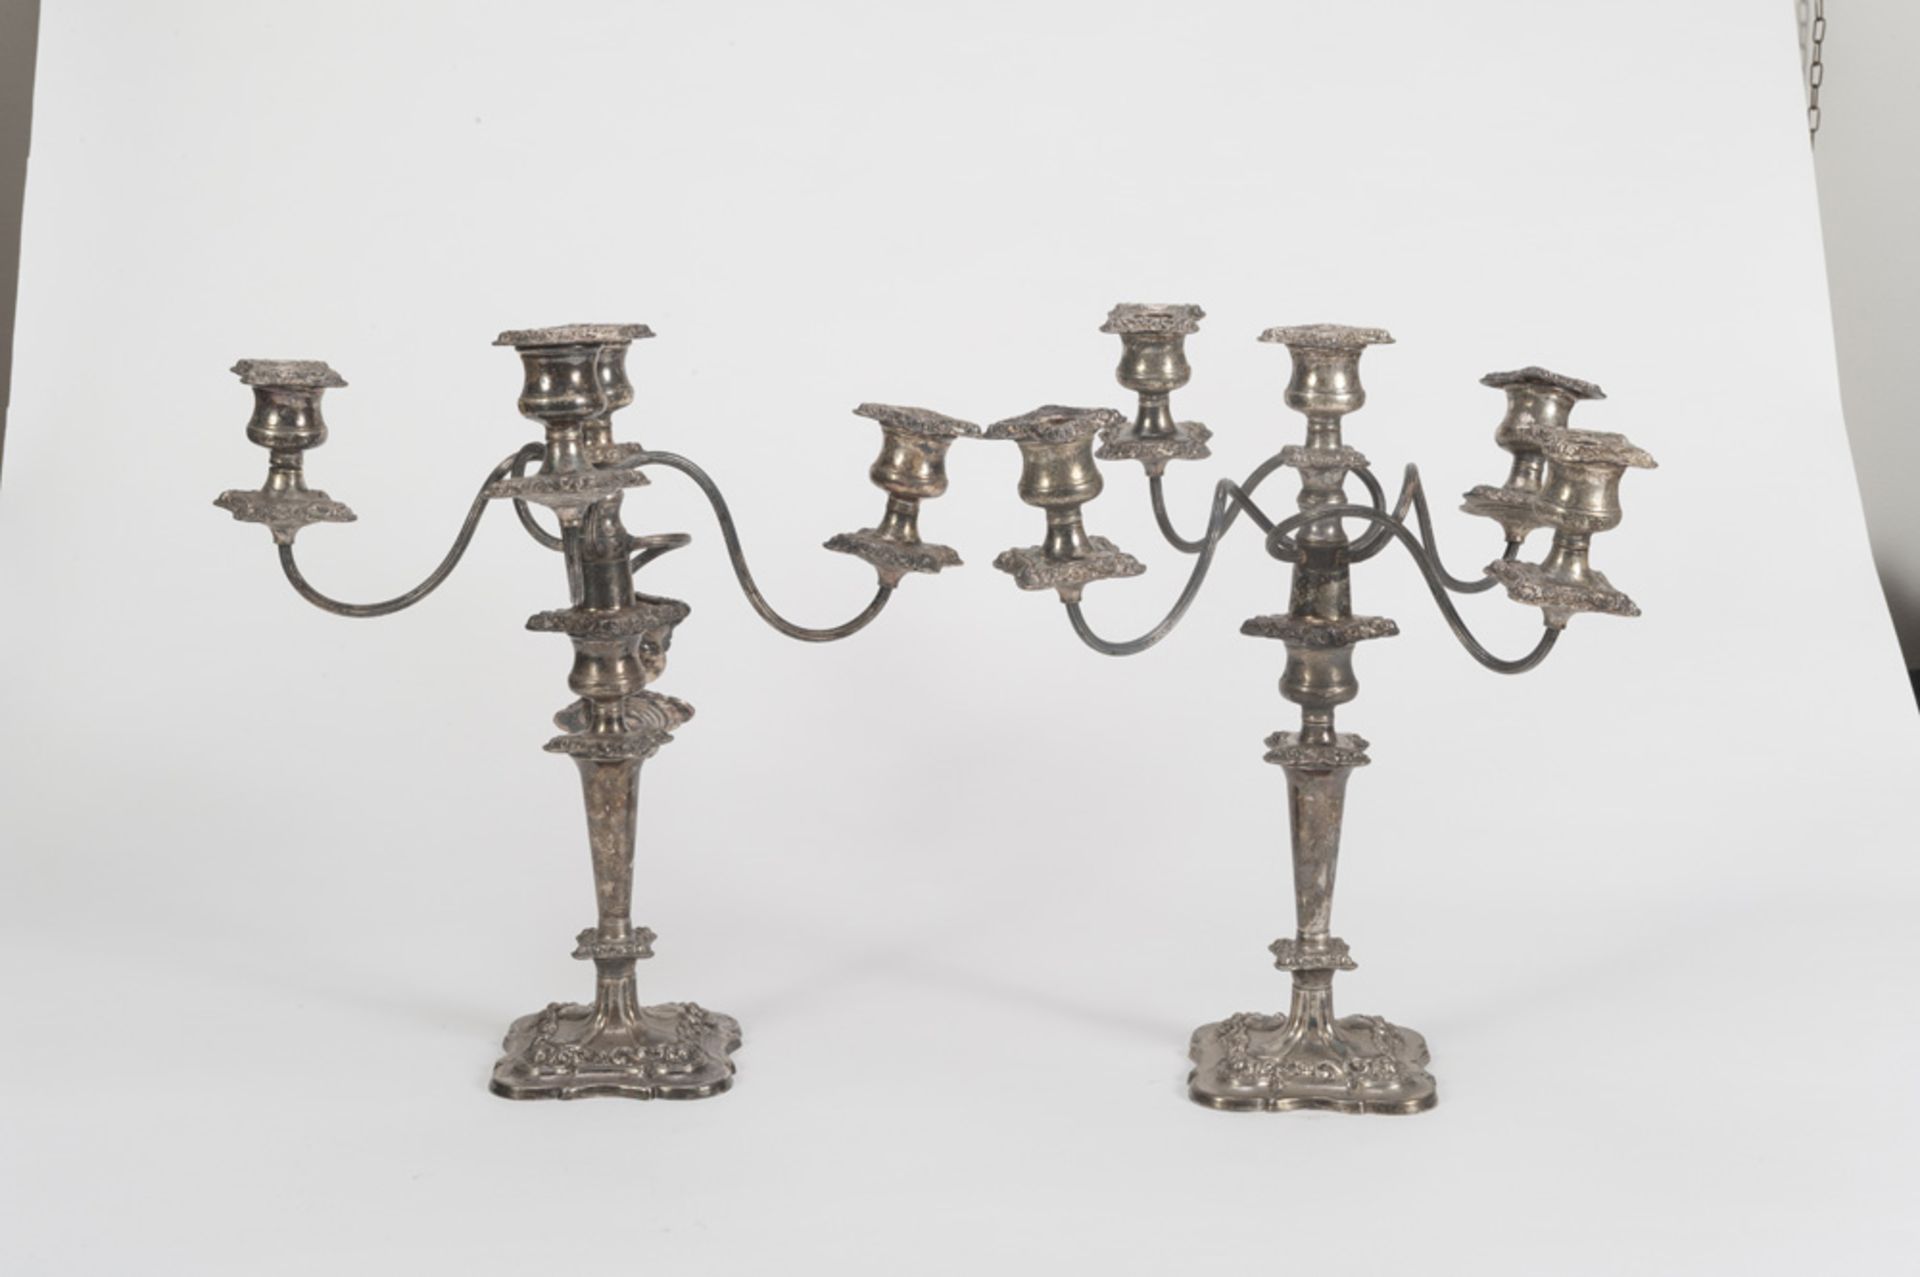 A PAIR OF SILVER-PLATED CANDELABRA ENGLAND LATE 19TH CENTURY five arms, with mouthpieces chiseled to